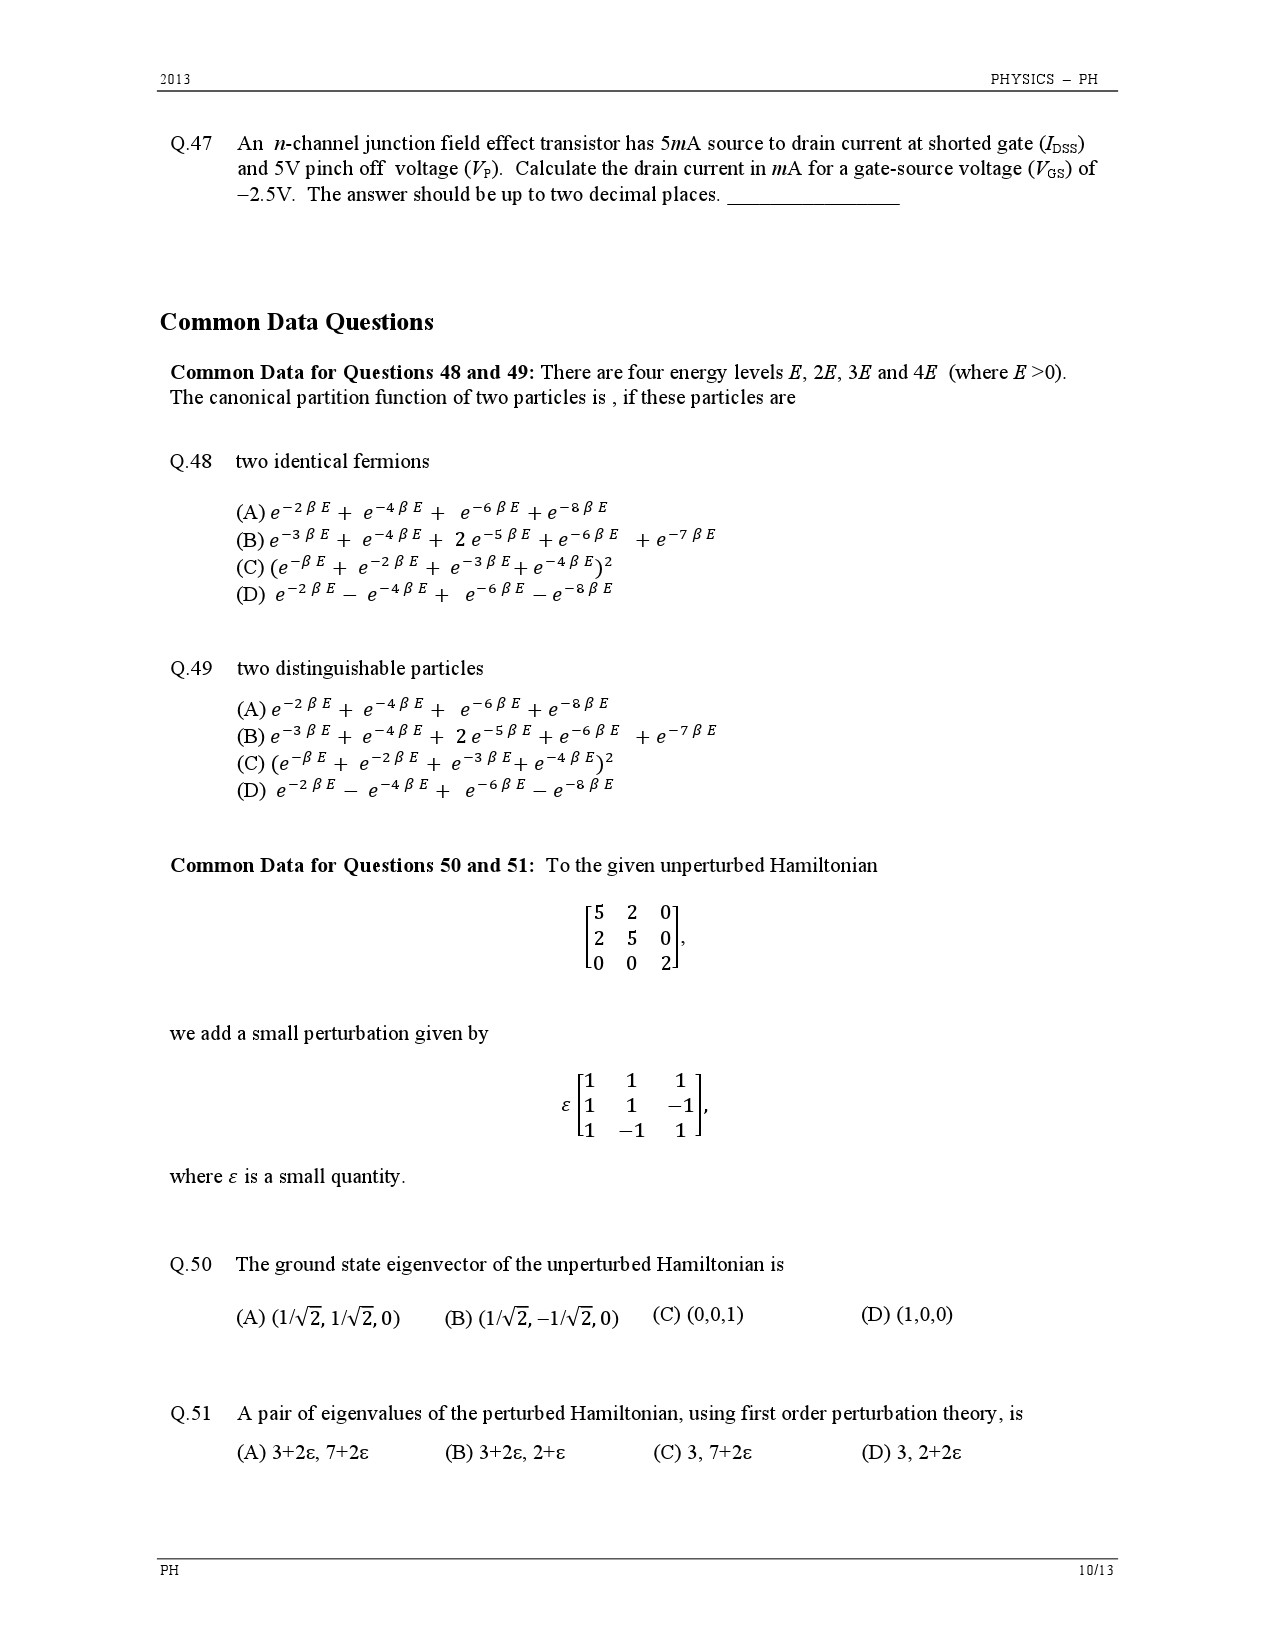 GATE Exam Question Paper 2013 Physics 10